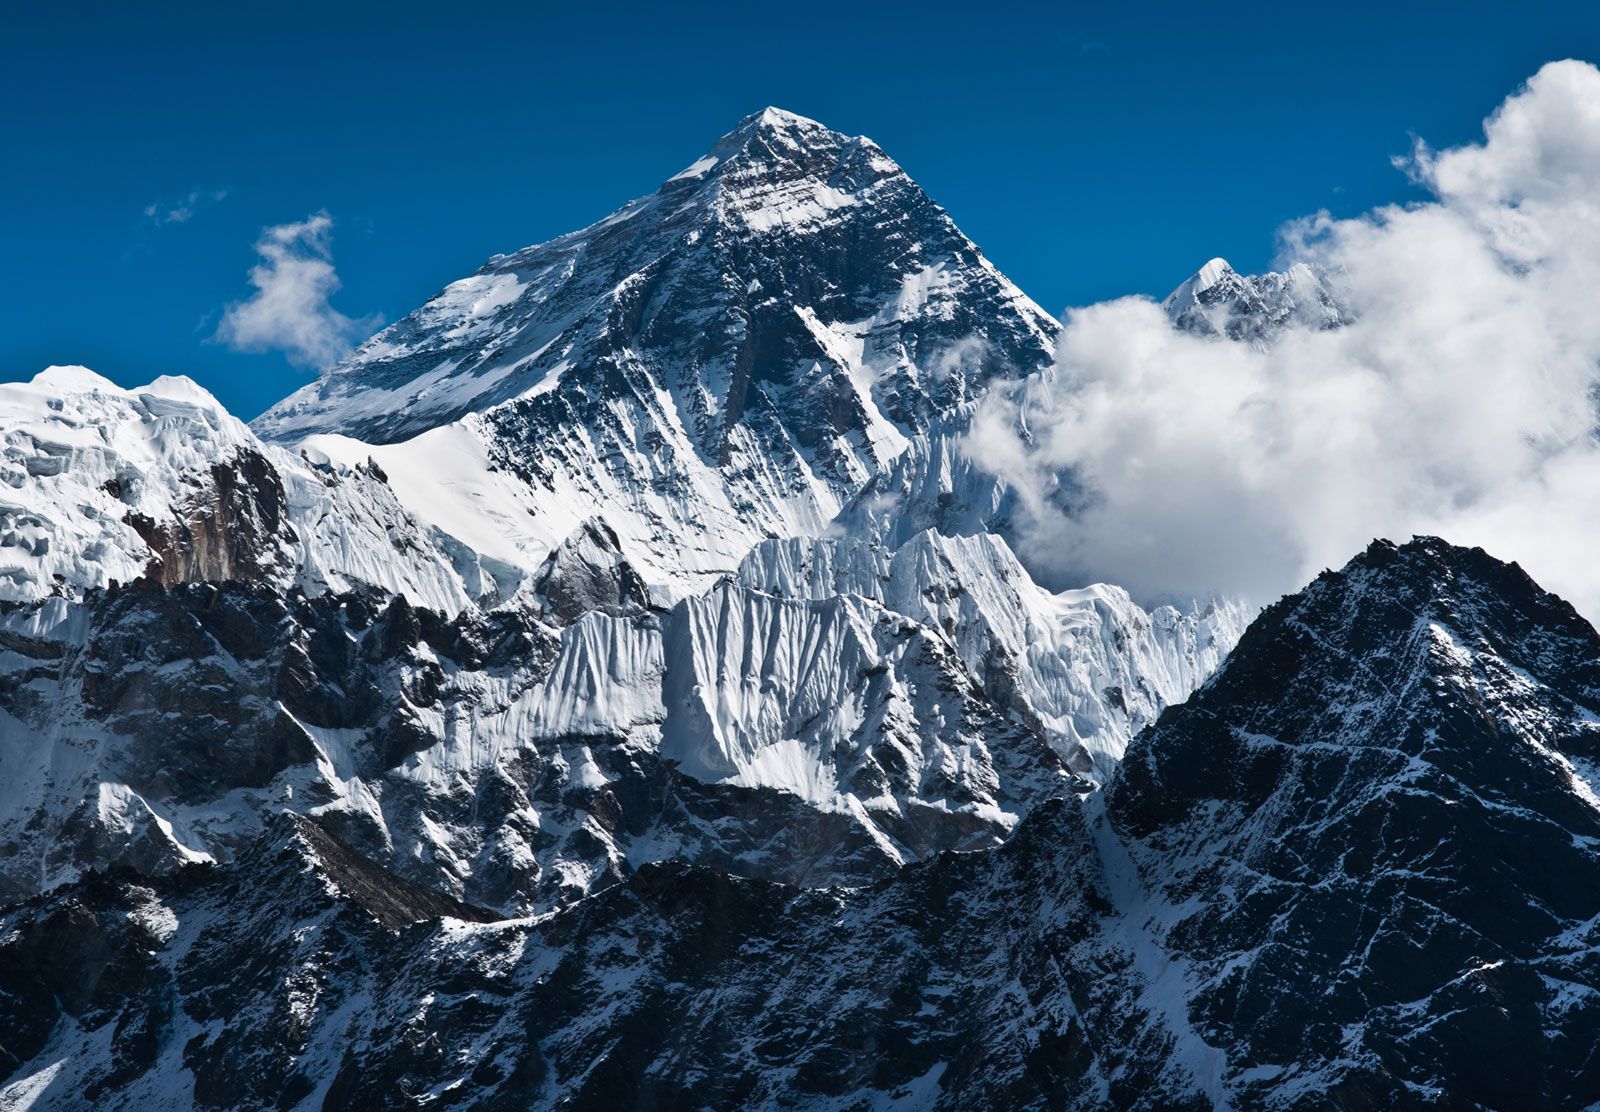 Two climbers including from Pakistan scale Mt Everest